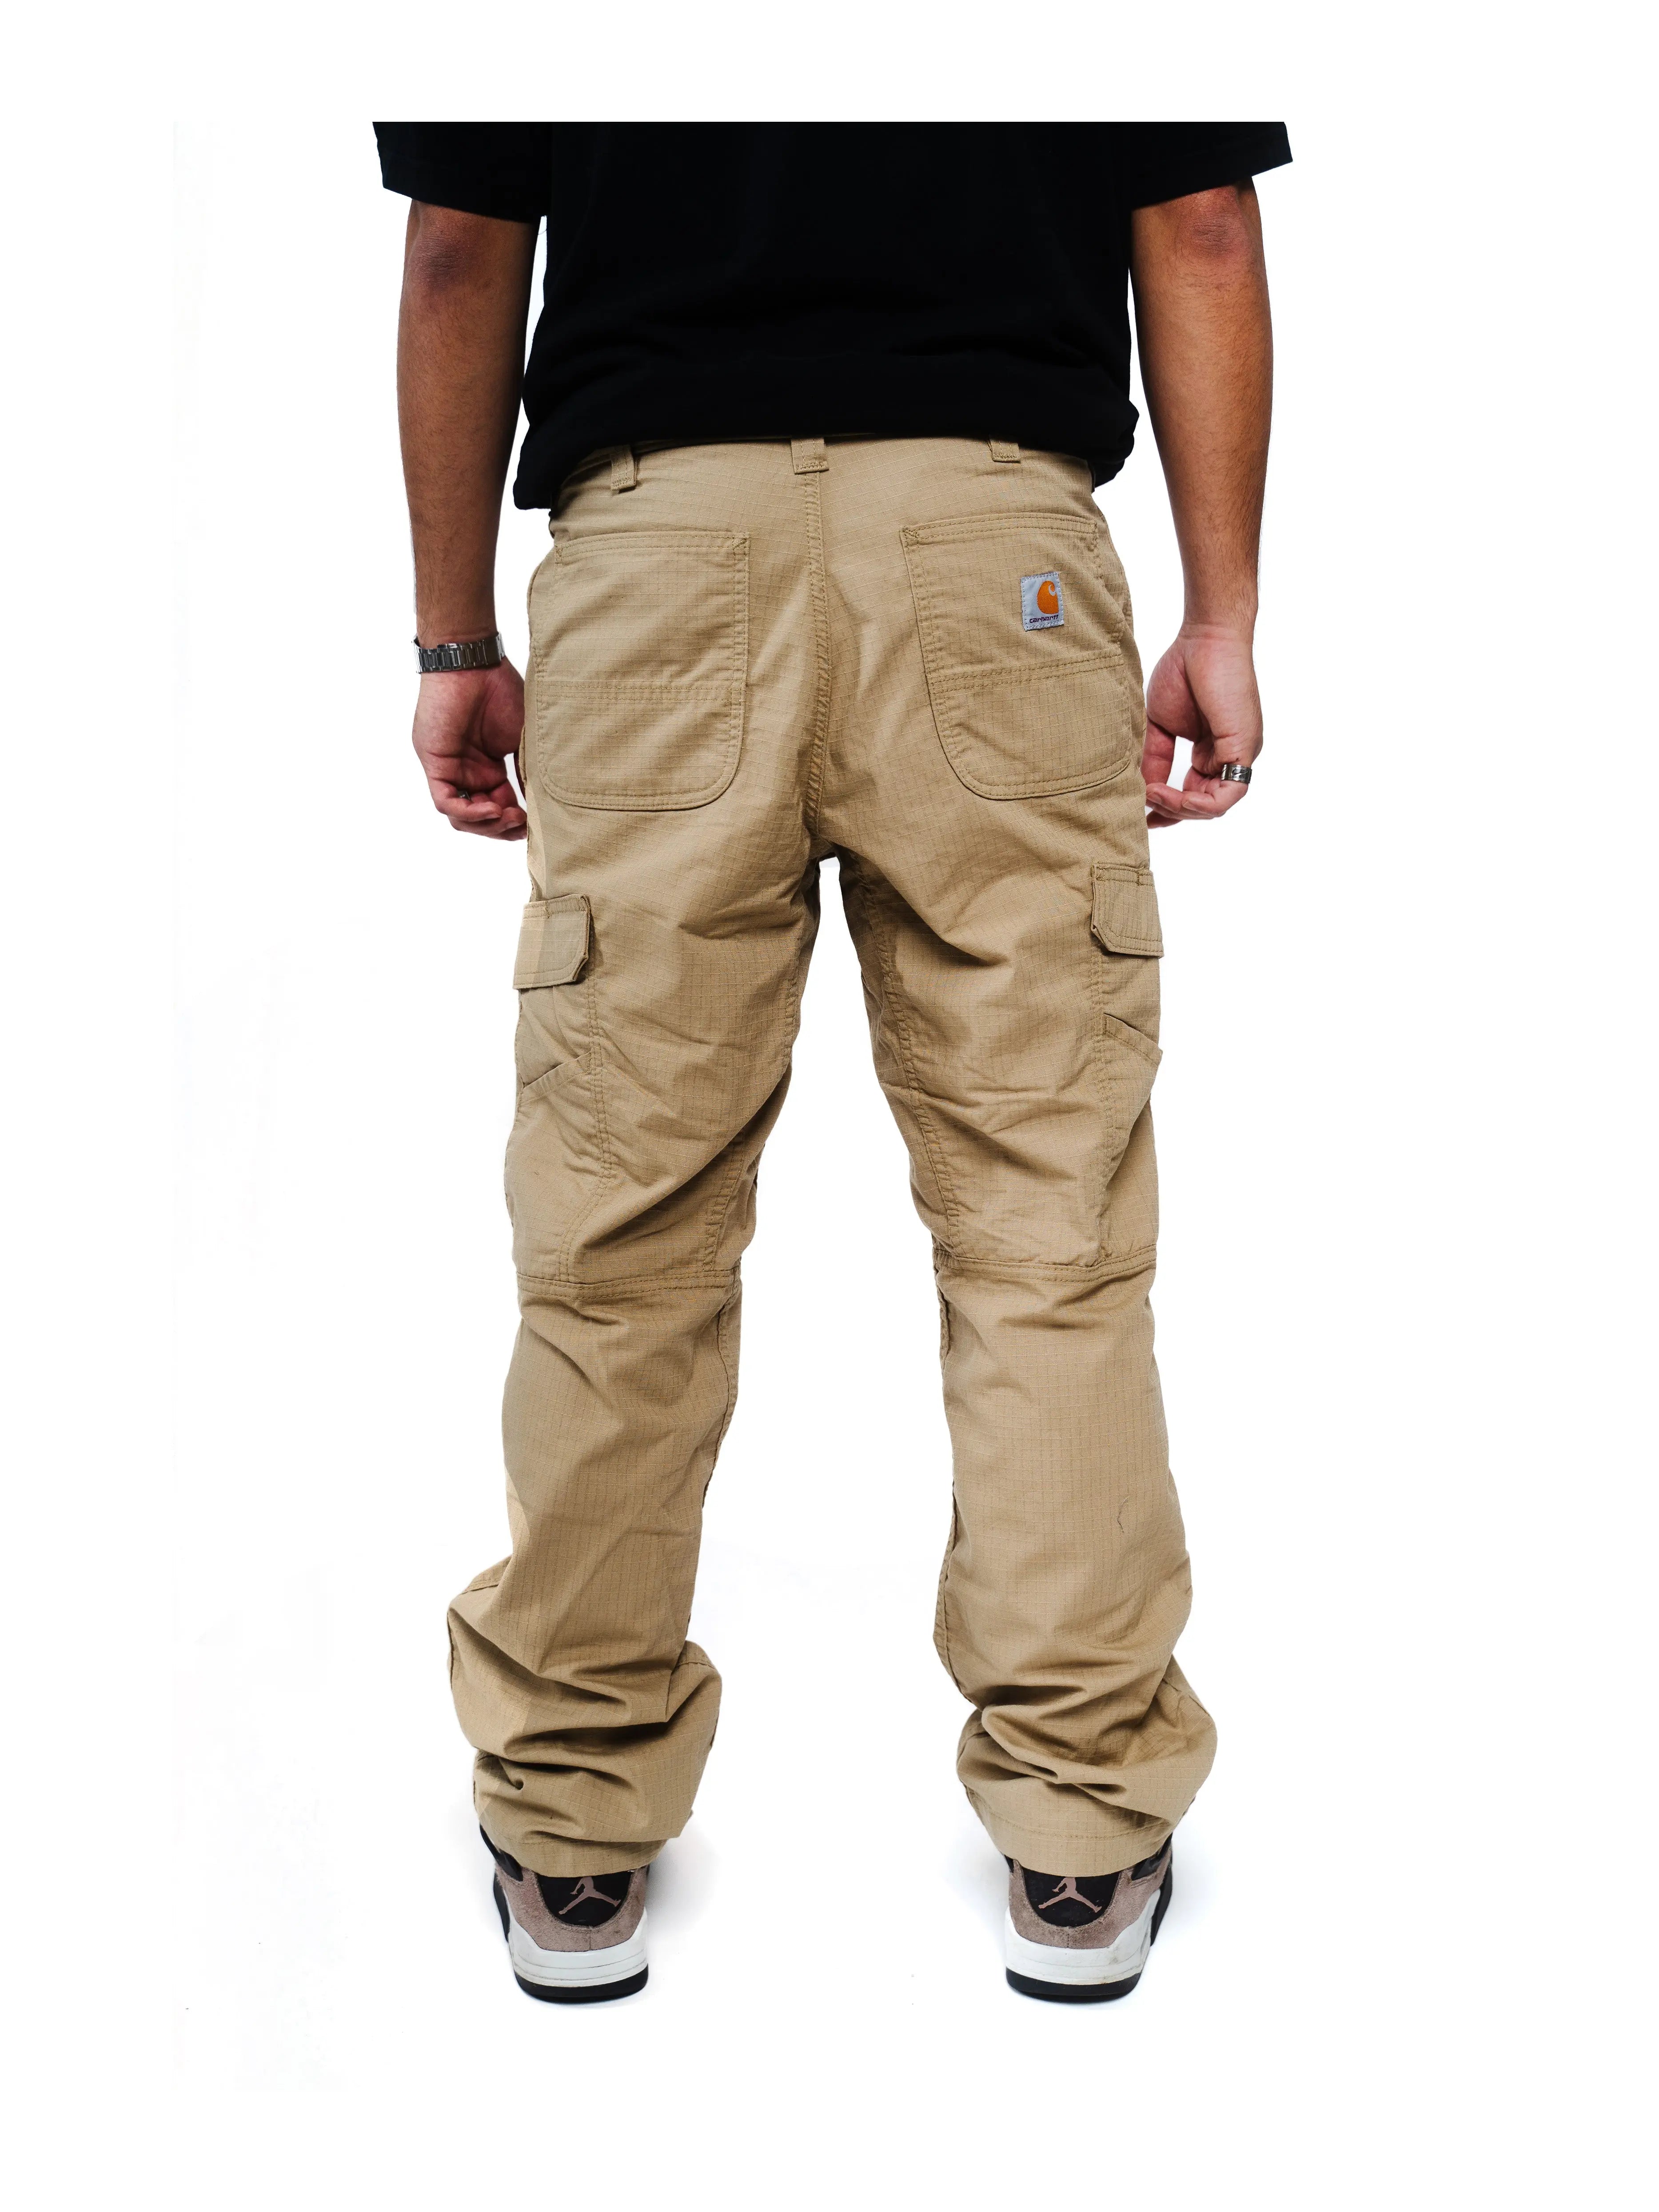 Carhartt Force Relaxed Fit Ripstop Cargo Work Pant Dark Khaki